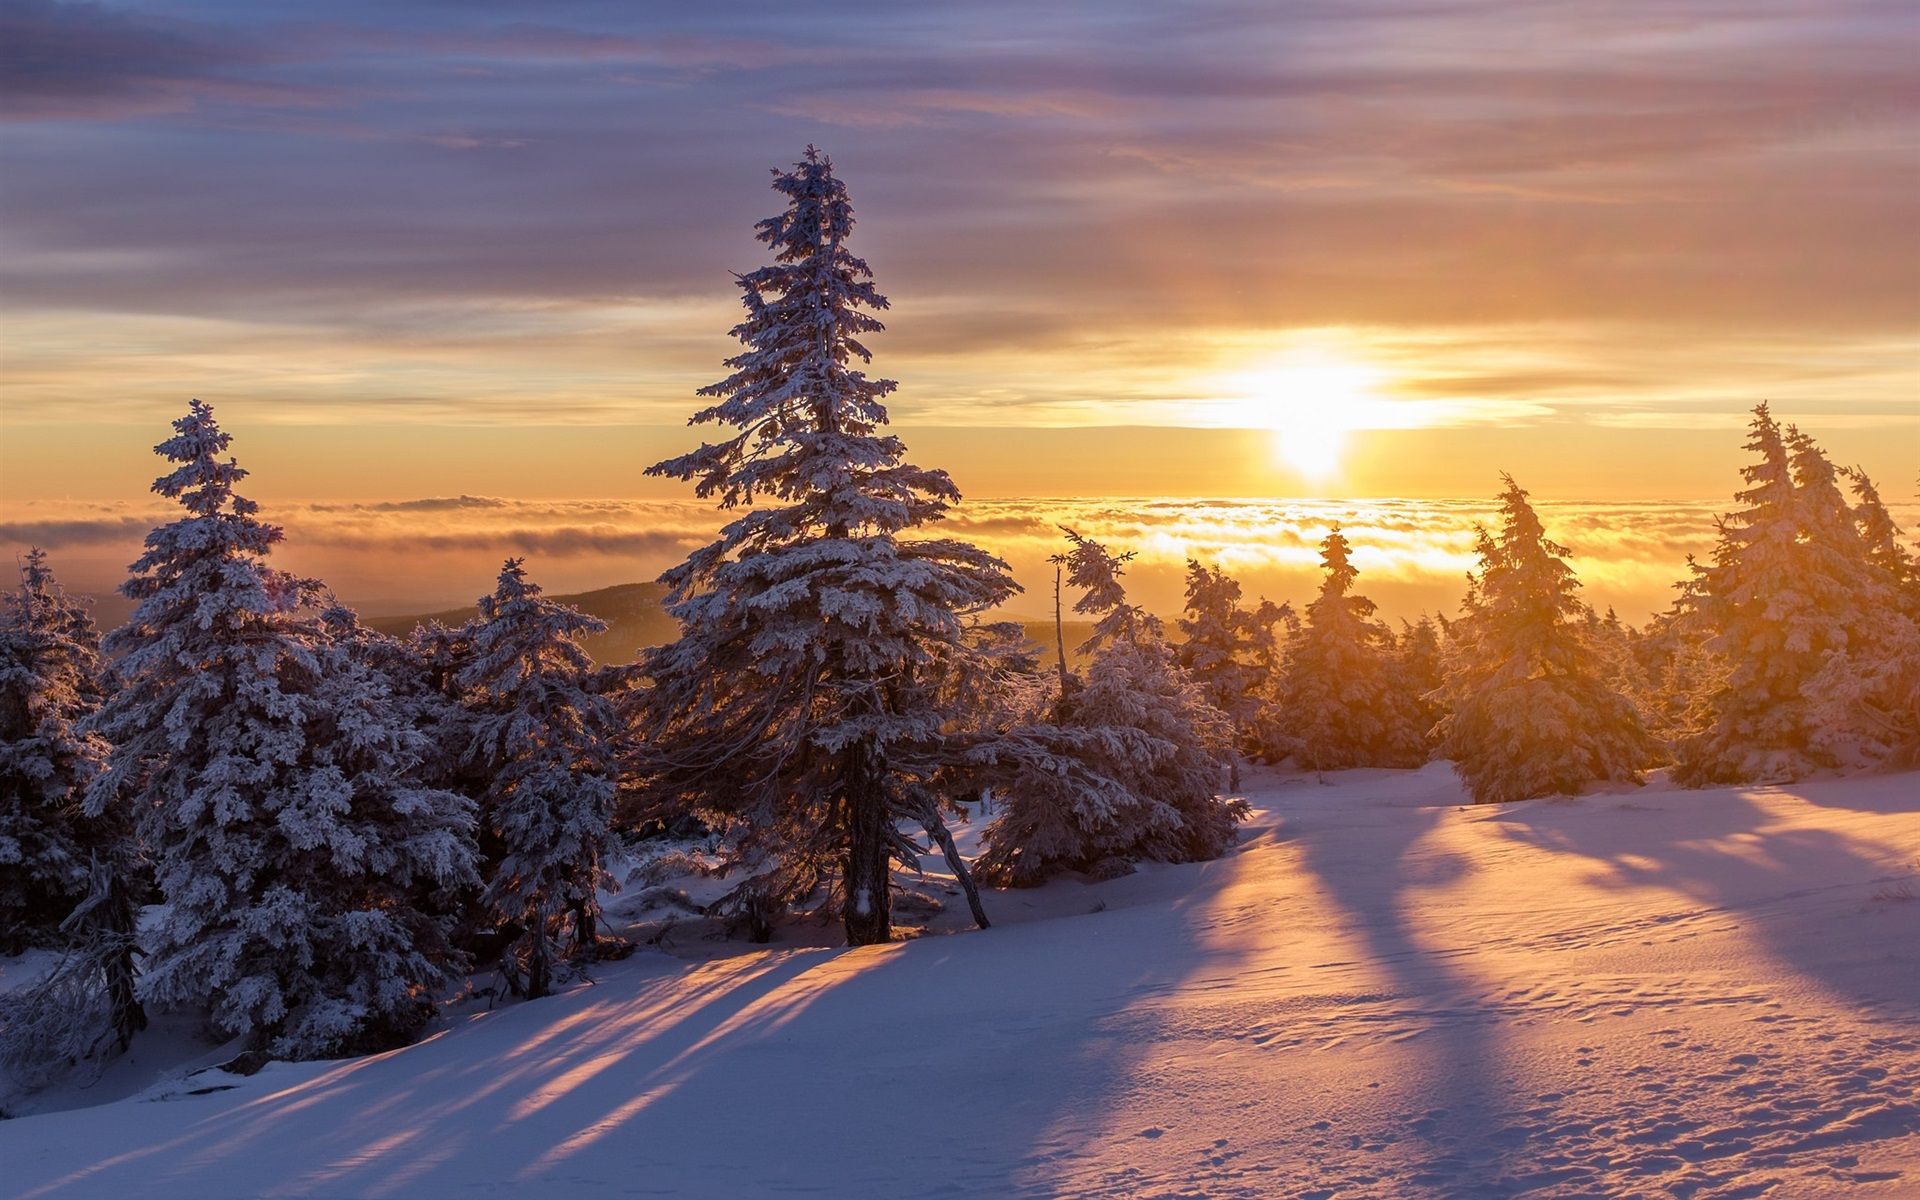 Snowy Forest At Sunrise Wallpapers Wallpaper Cave